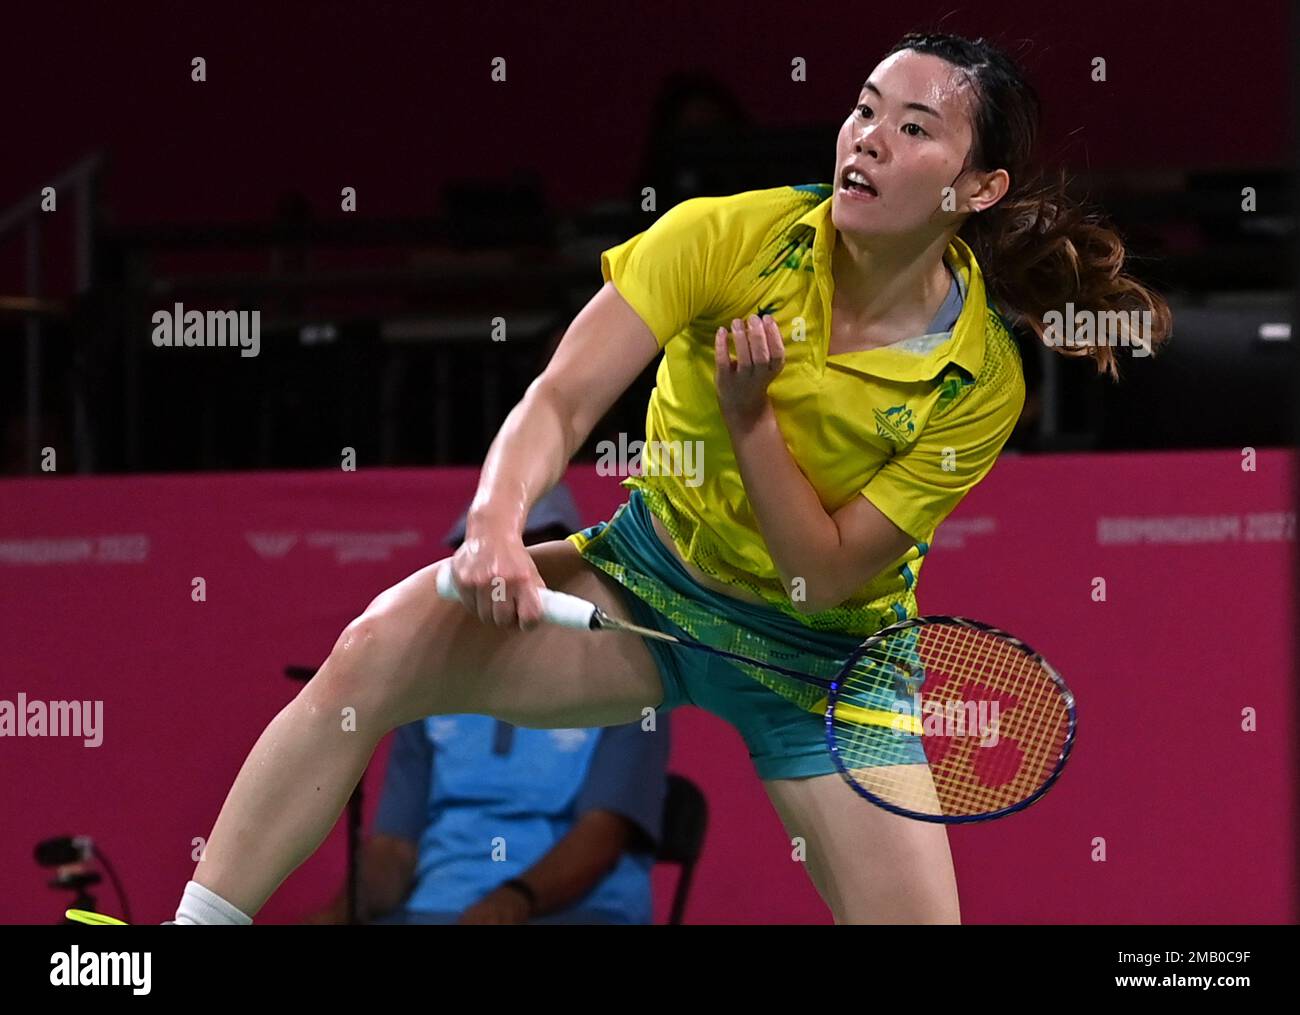 Australias Tiffany Ho competes against Pakistans Mahoor Shahzad during the womens singles Badminton match at the Commonwealth Games in Birmingham, England, Saturday, July 30, 2022